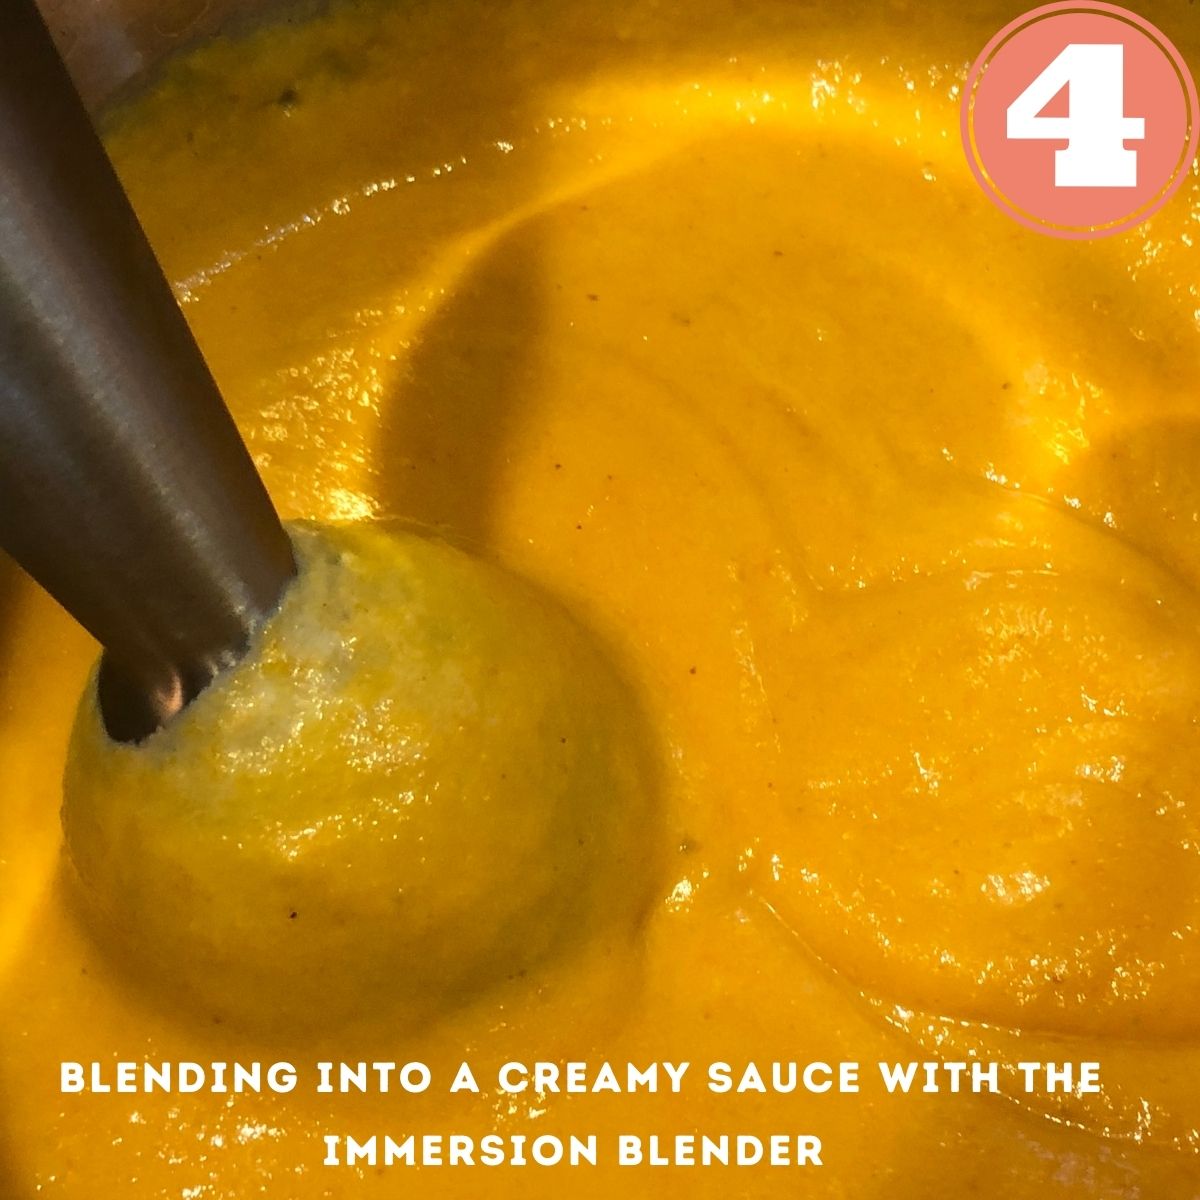 Immersion Blender making a creamy Mac and cheese sauce